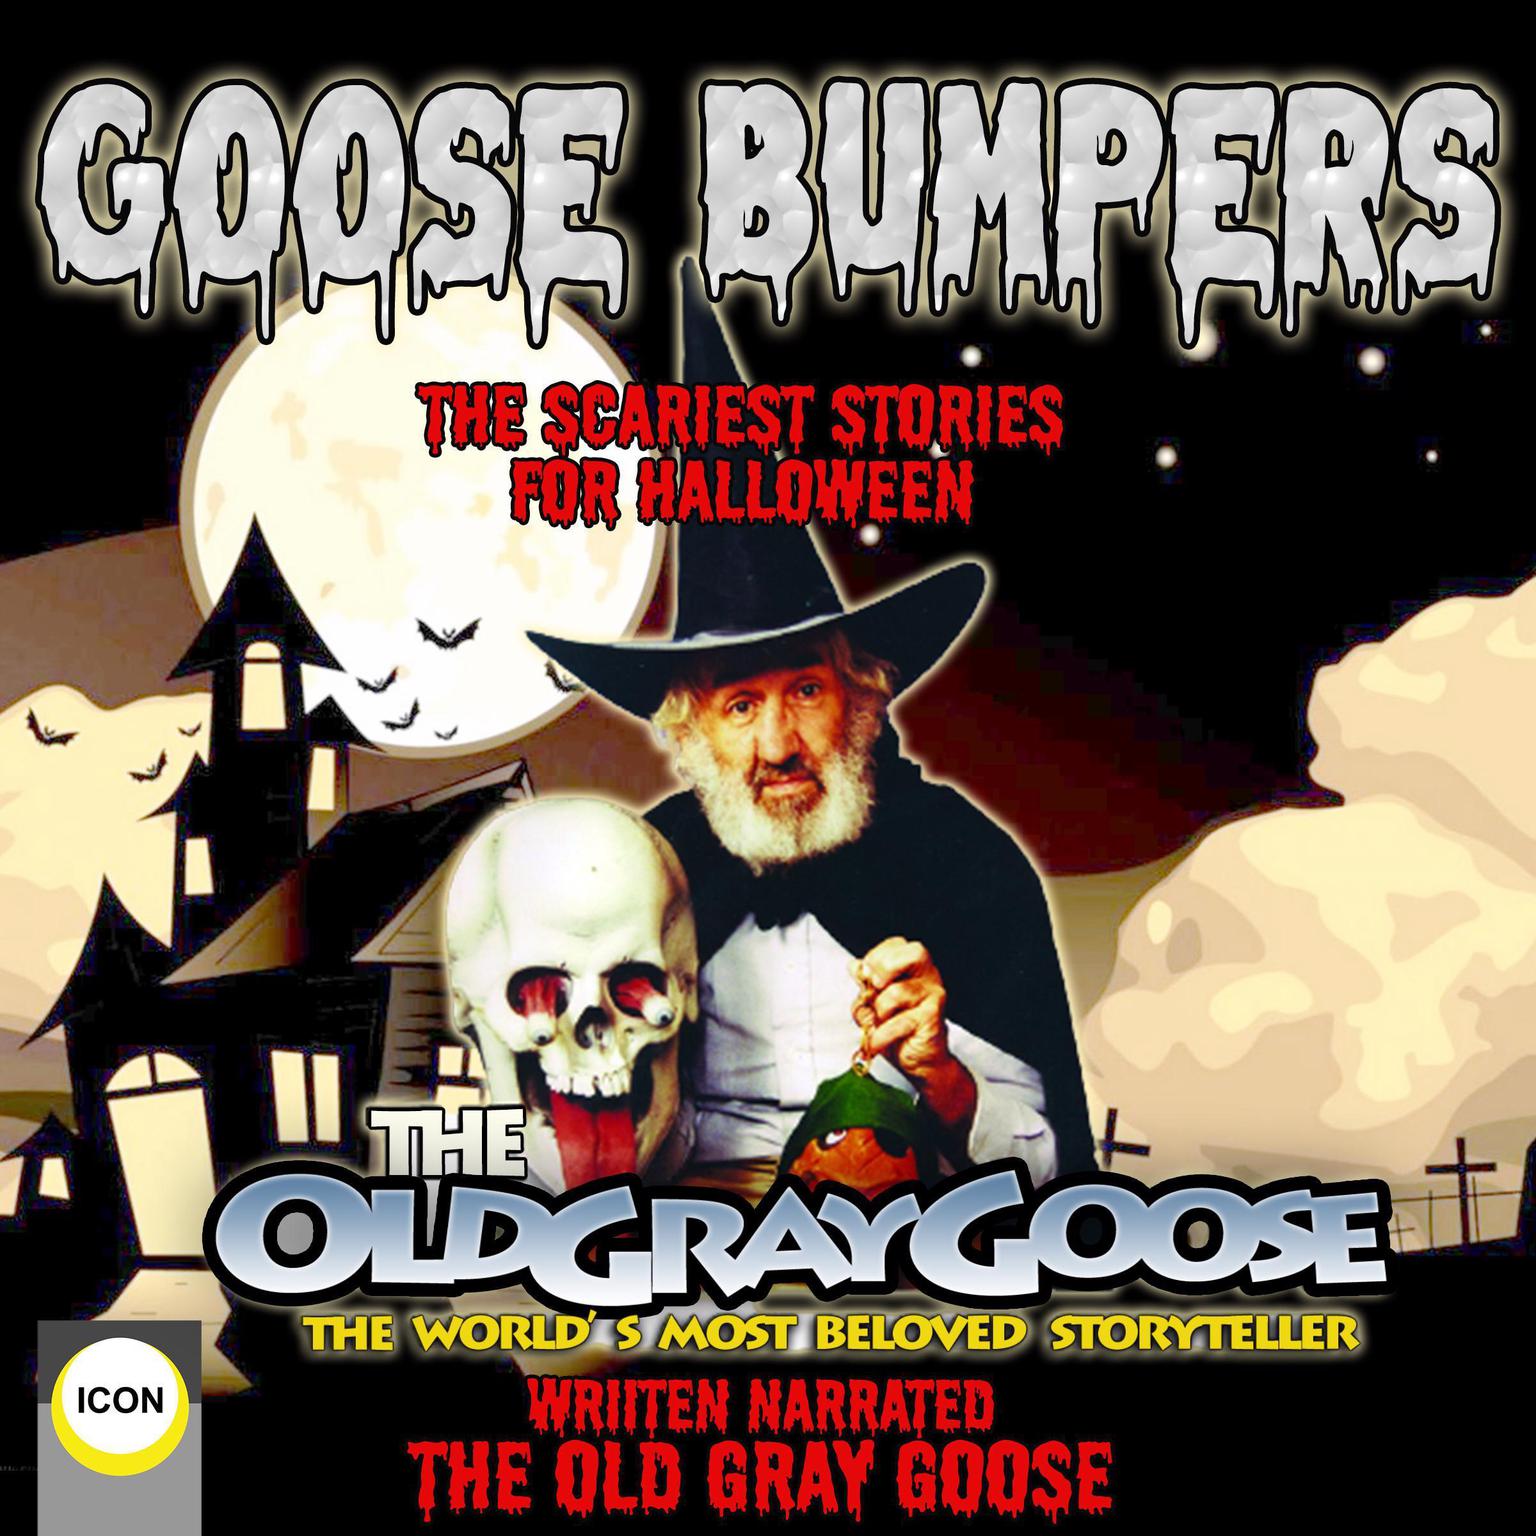 Goose Bumpers The Scariest Stories For Halloween: The Old Gray Goose The Worlds Most Beloved Storyteller Audiobook, by The Old Gray Goose